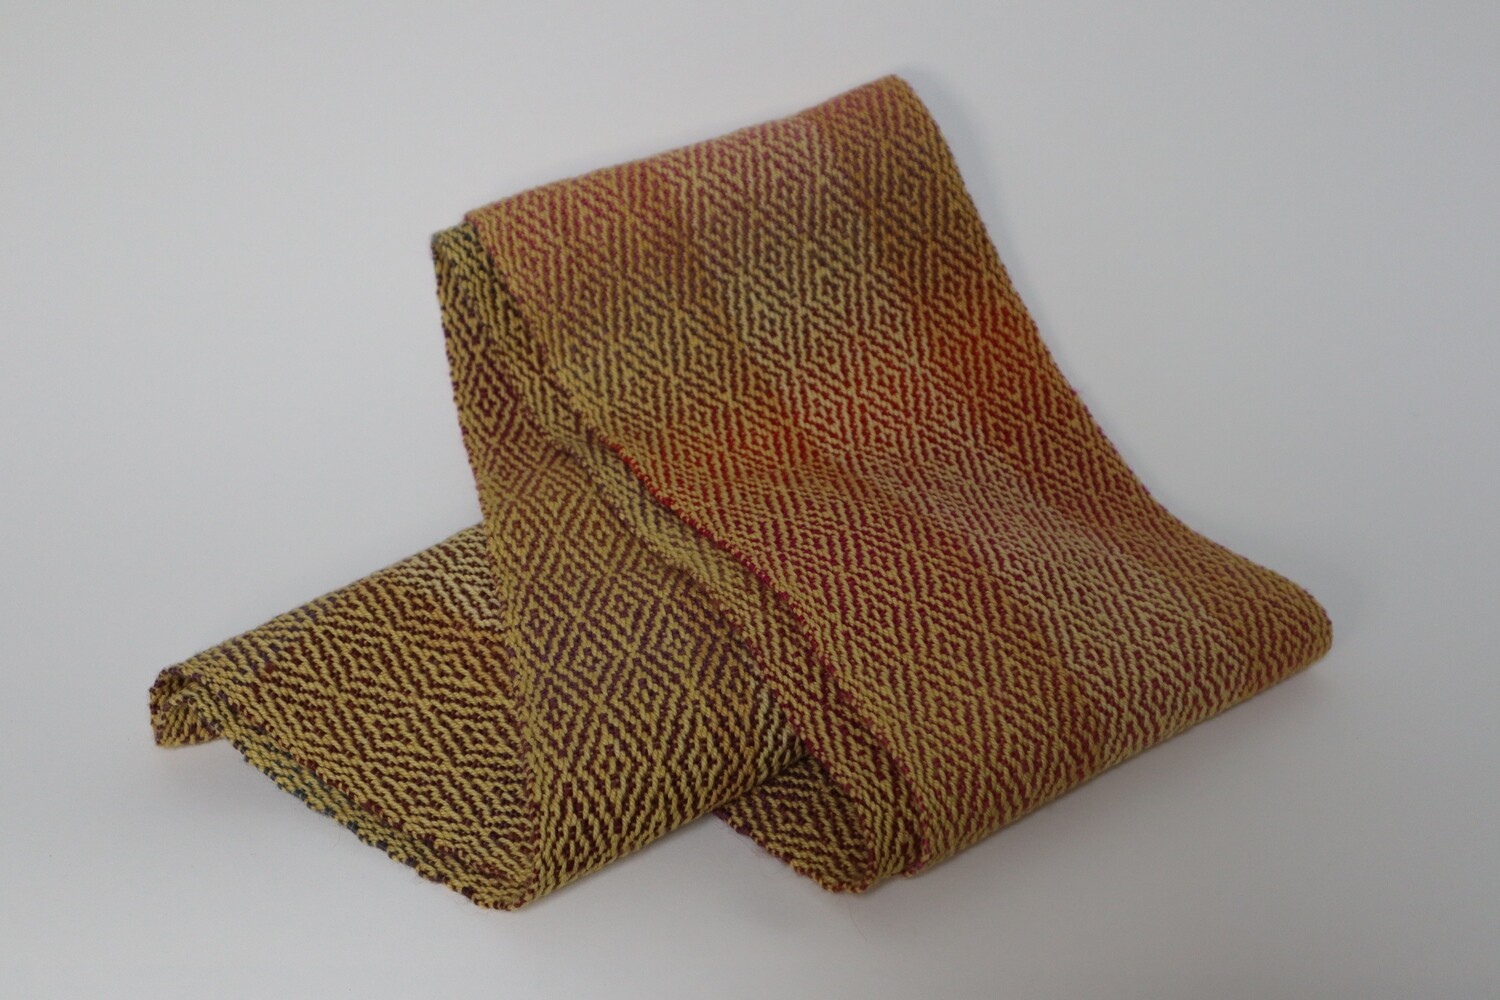 Scarf dyed with apple leaves